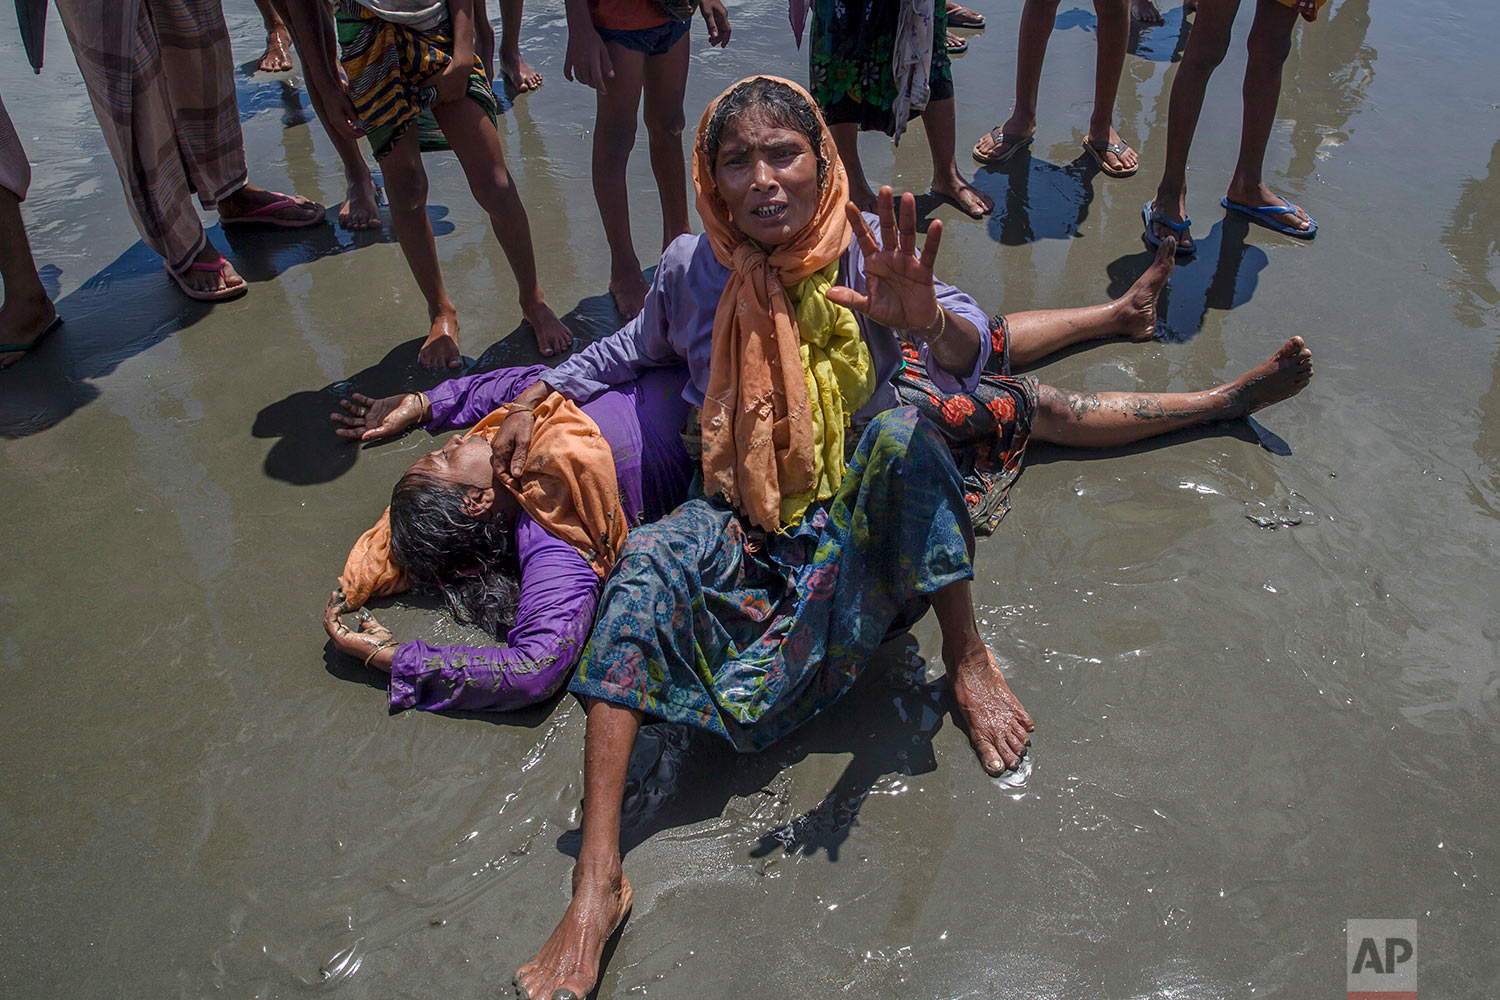  A Rohingya Muslim woman, who crossed over from Myanmar into Bangladesh, shouts for help as a relative lies unconscious after the boat they were traveling in capsized minutes before reaching shore at Shah Porir Dwip, Bangladesh, Thursday, Sept. 14, 2